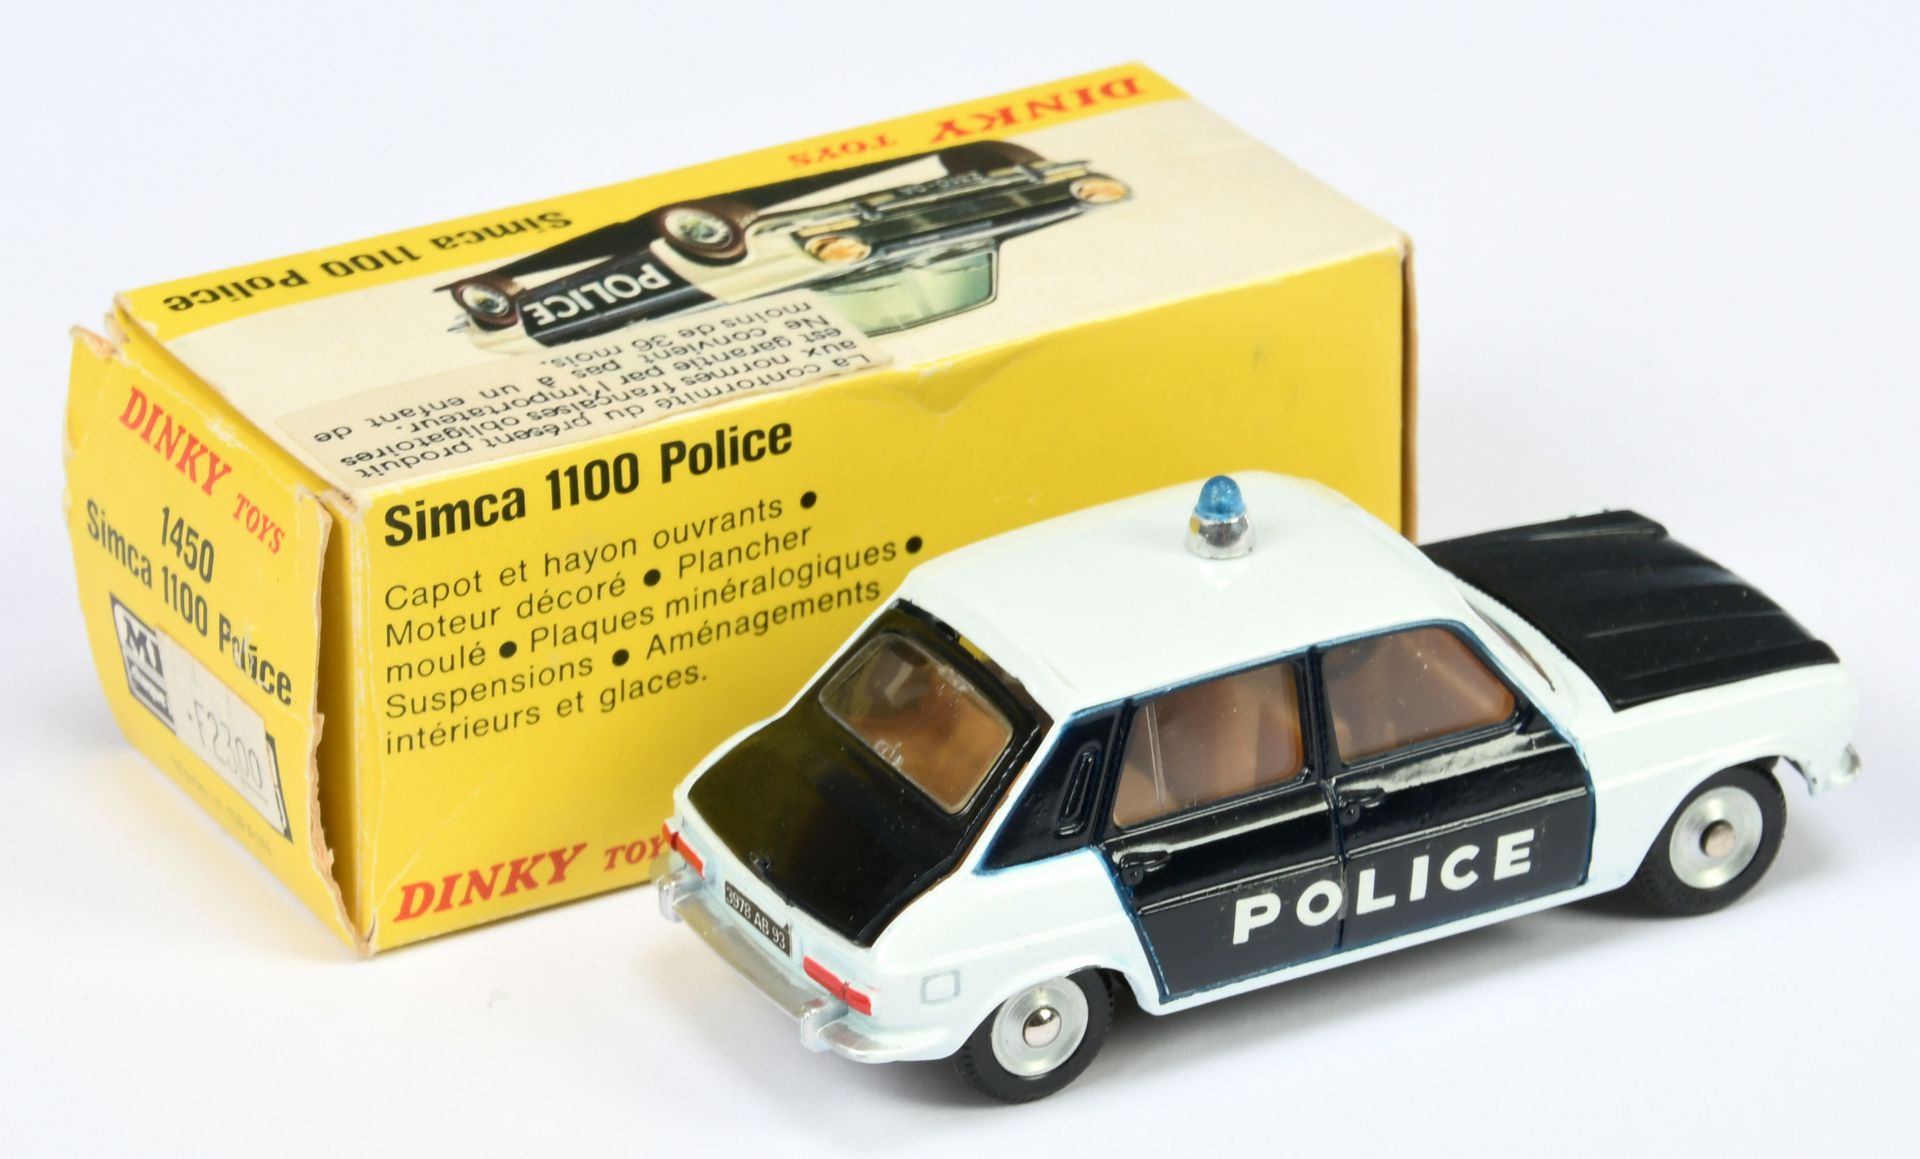 French Dinky Toys 1450 Simca 1100 "Police" car - White and Navy blue with tan interior, blue roof... - Image 2 of 2